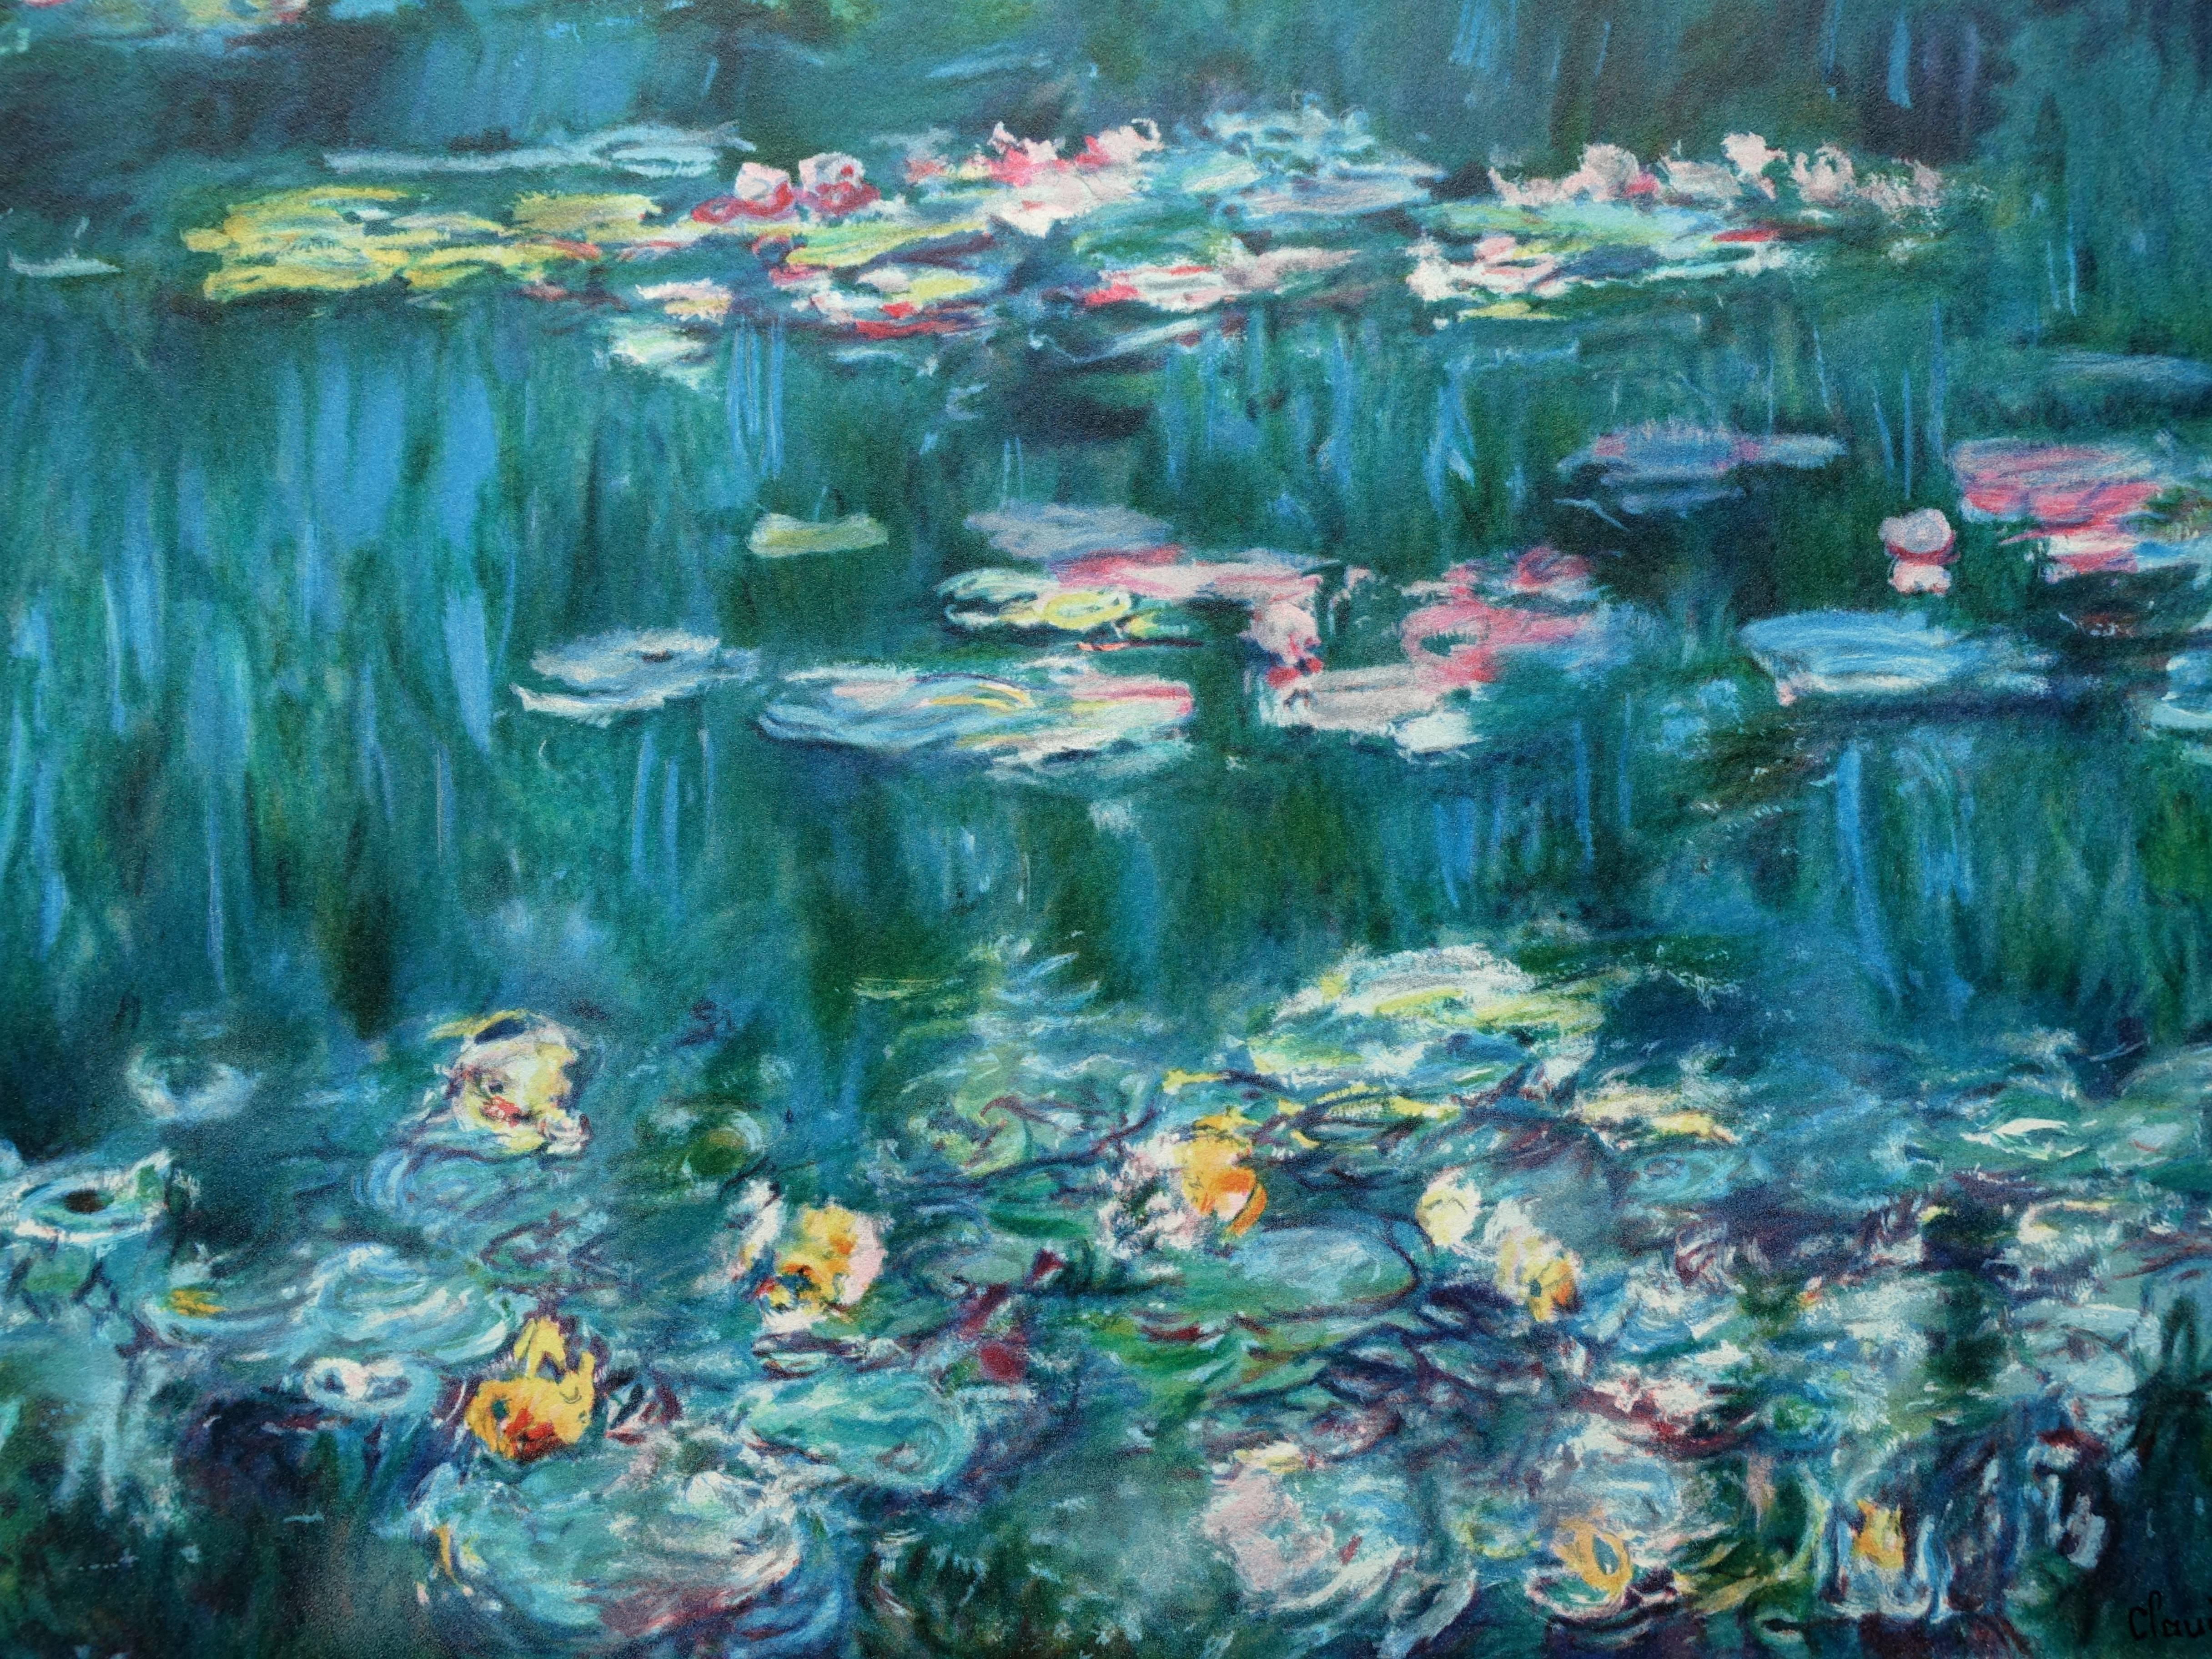 The Nymphs in Giverny - Lithograph - 300 copies - Blue Landscape Print by (after) Claude Monet